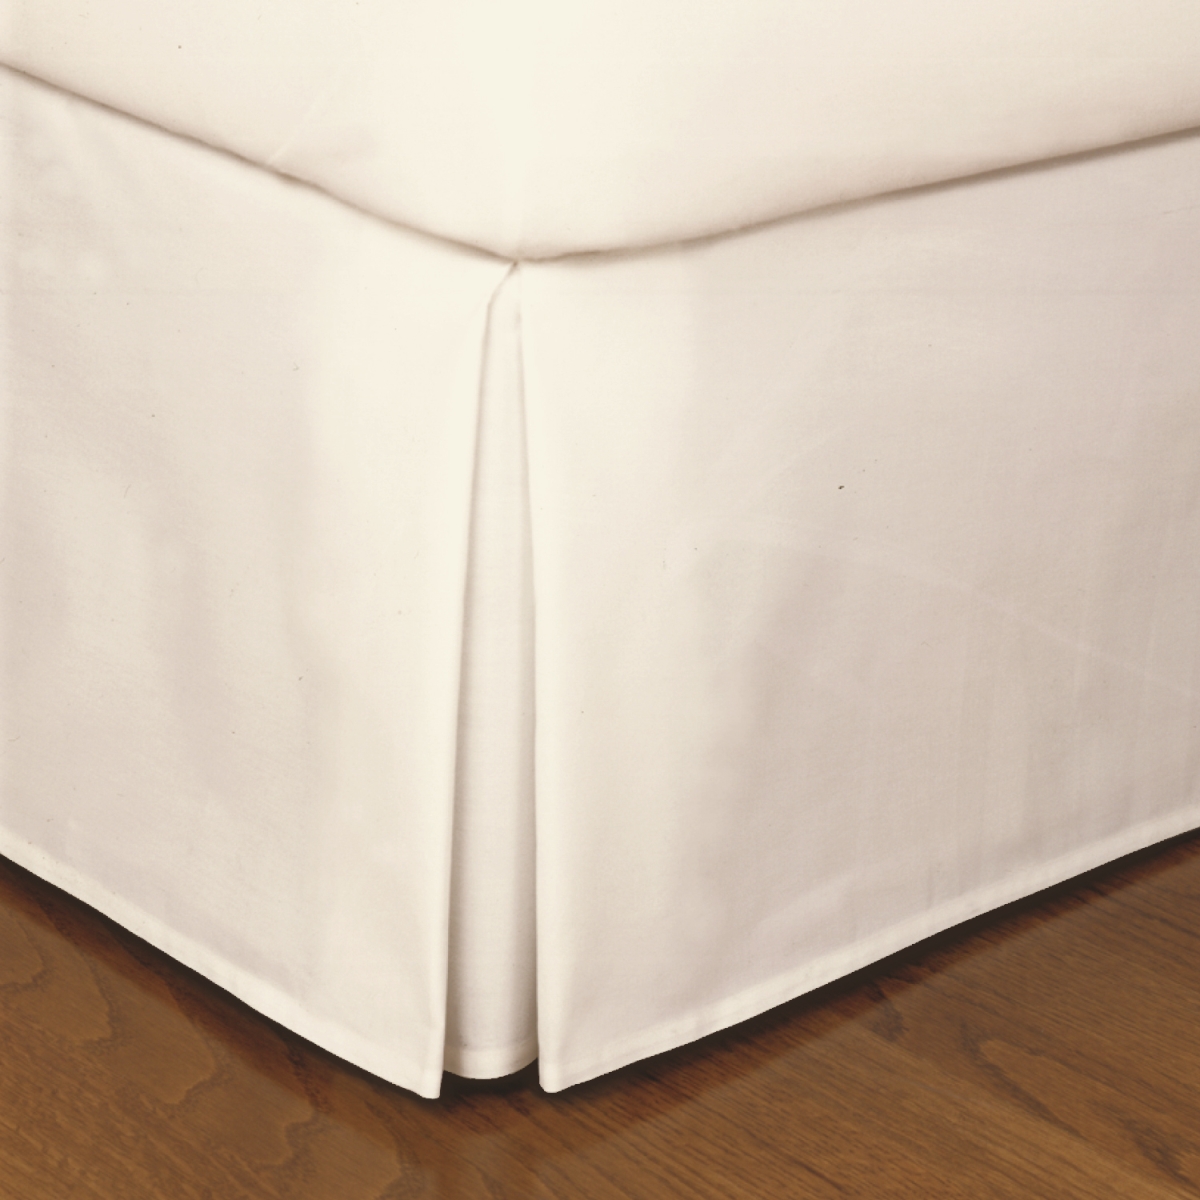 Fre23614ivor05 14 In. Microfiber Bed Skirts Ivory - Cal King